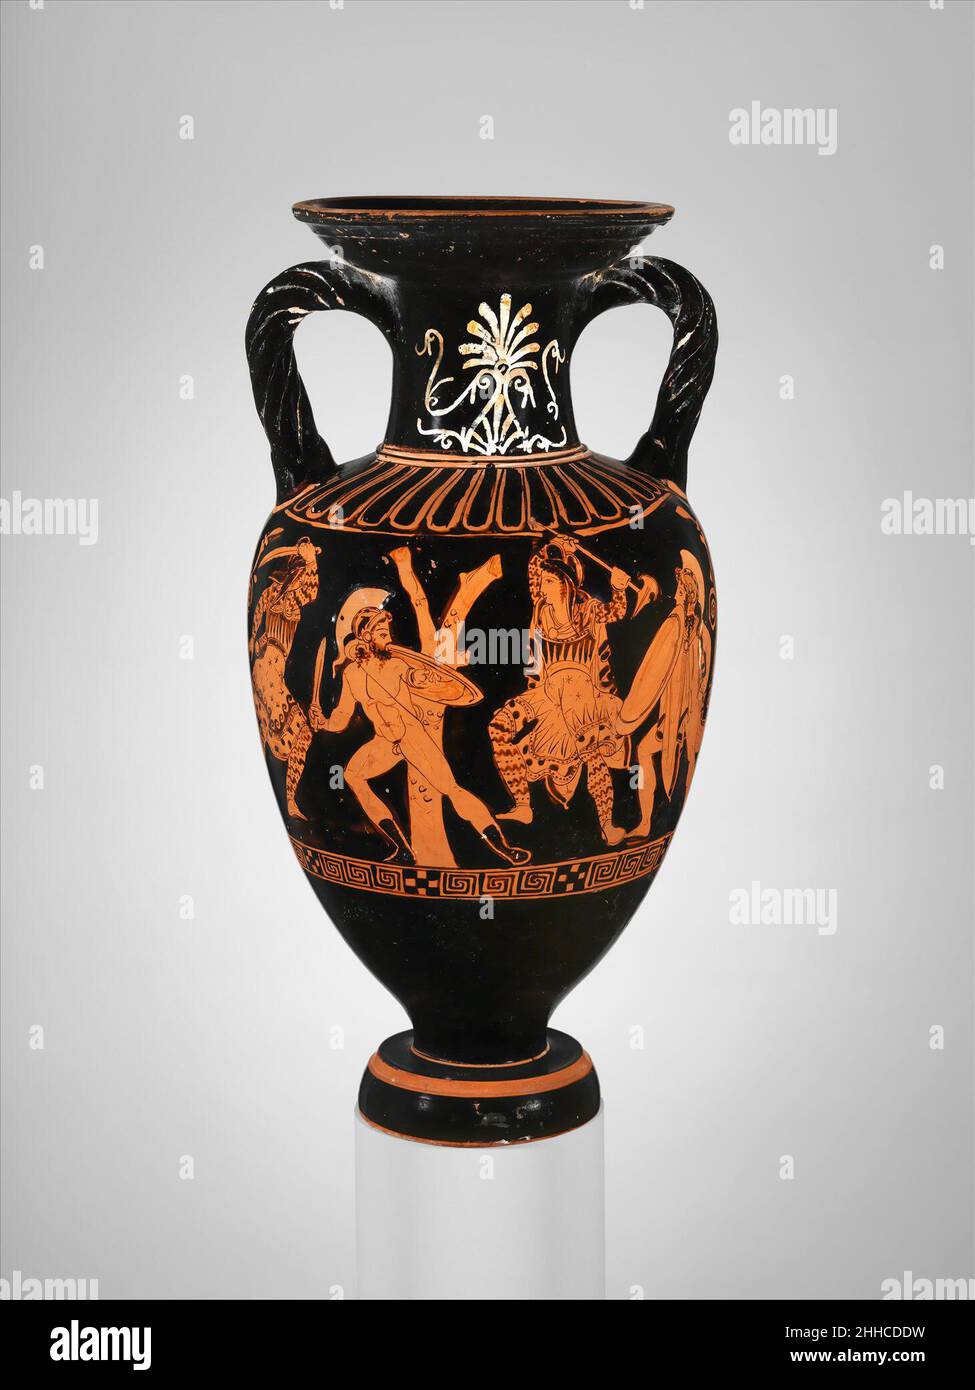 Terracotta neck-amphora (jar) with twisted handles ca. 400 B.C. Attributed to the Suessula Painter Obverse, combat of Greeks against AmazonsReverse, three youthsThis vase is complementary in its main scene to the adjacent work with which it was found. The battle scene reveals the artist's interest in action and his ease with the medium. It is particularly revealing to contrast the conventional, rather anemic palmette on the neck with the barren tree that the artist had seen first-hand.. Terracotta neck-amphora (jar) with twisted handles  254518 : Attributed to the Suessula Painter, Terracotta Stock Photo